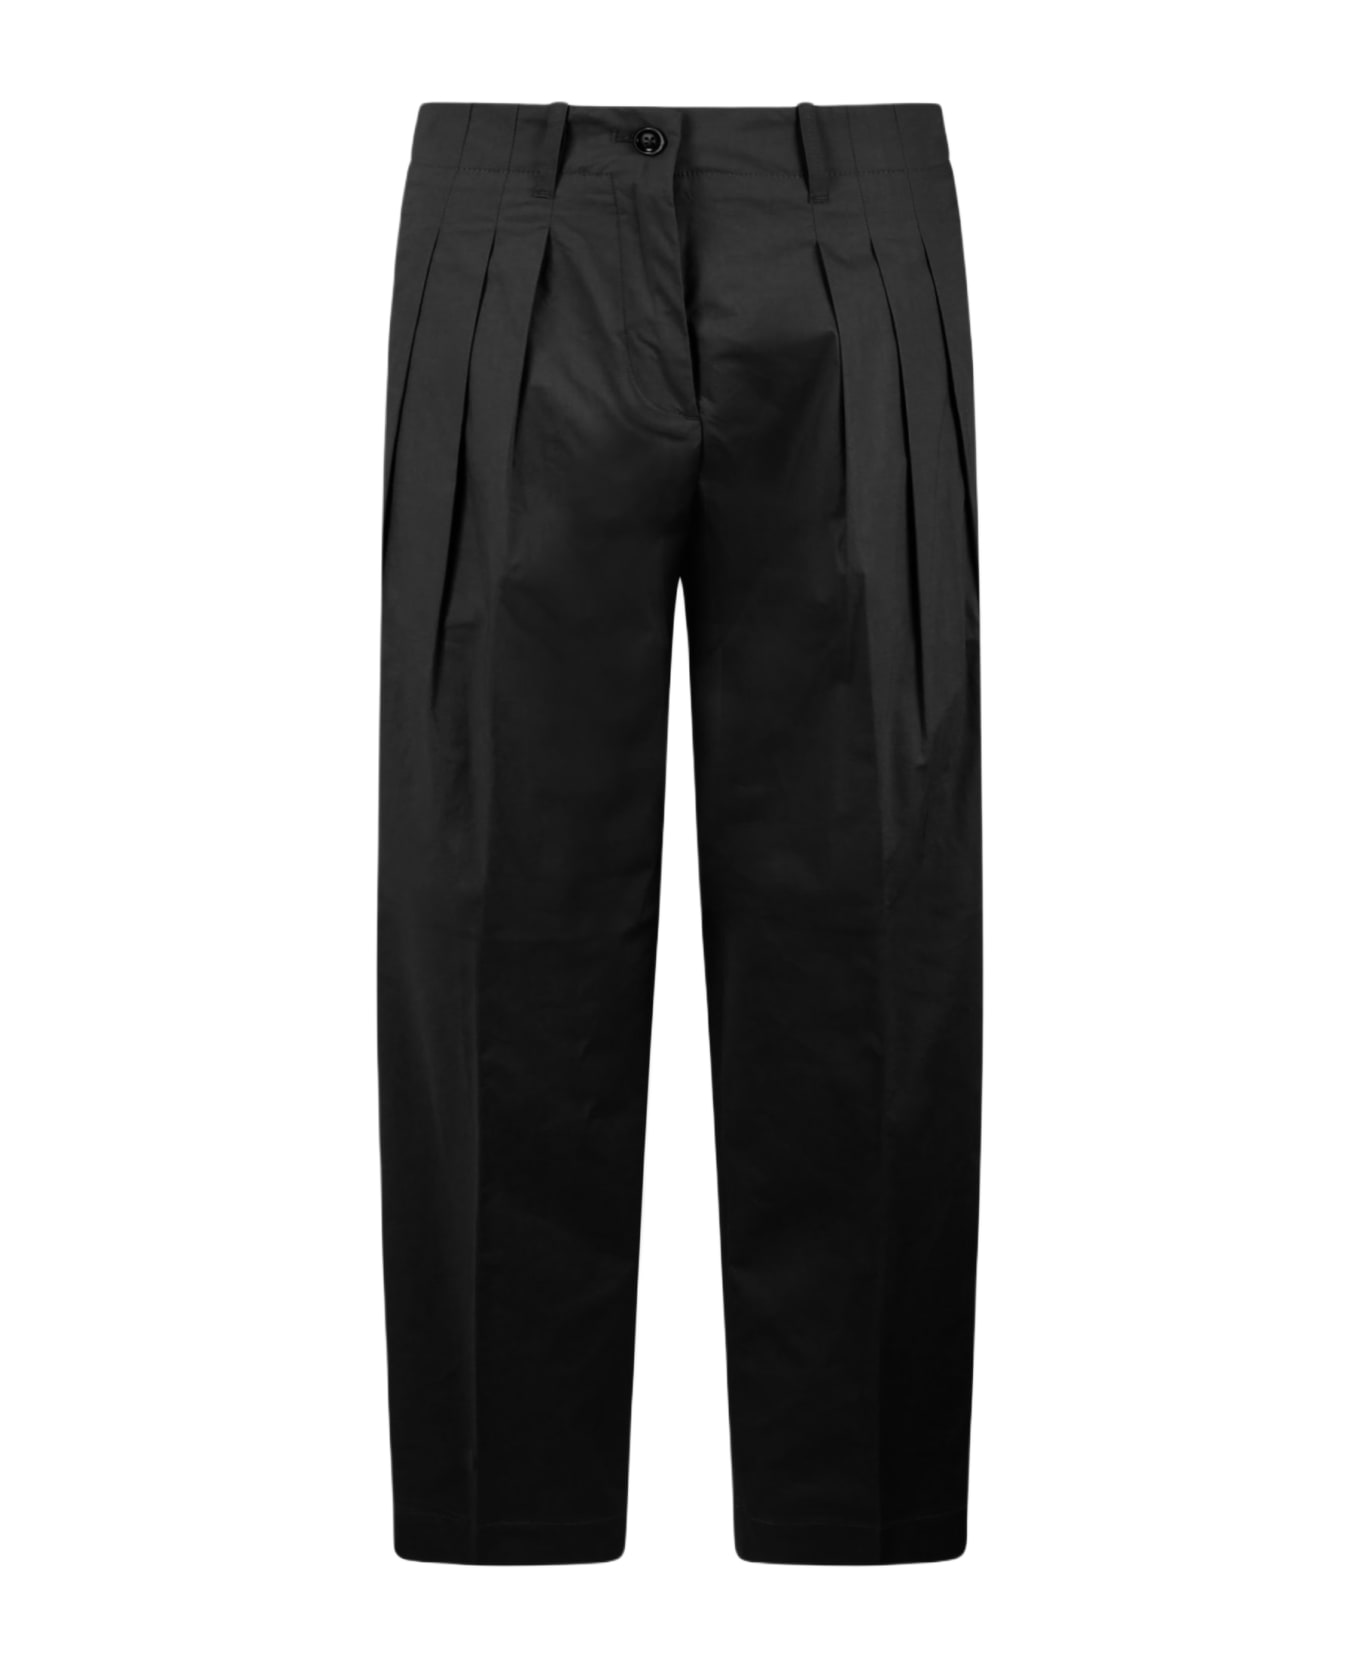 Nine in the Morning Diamante Carrot 3 Pences Trousers - Black